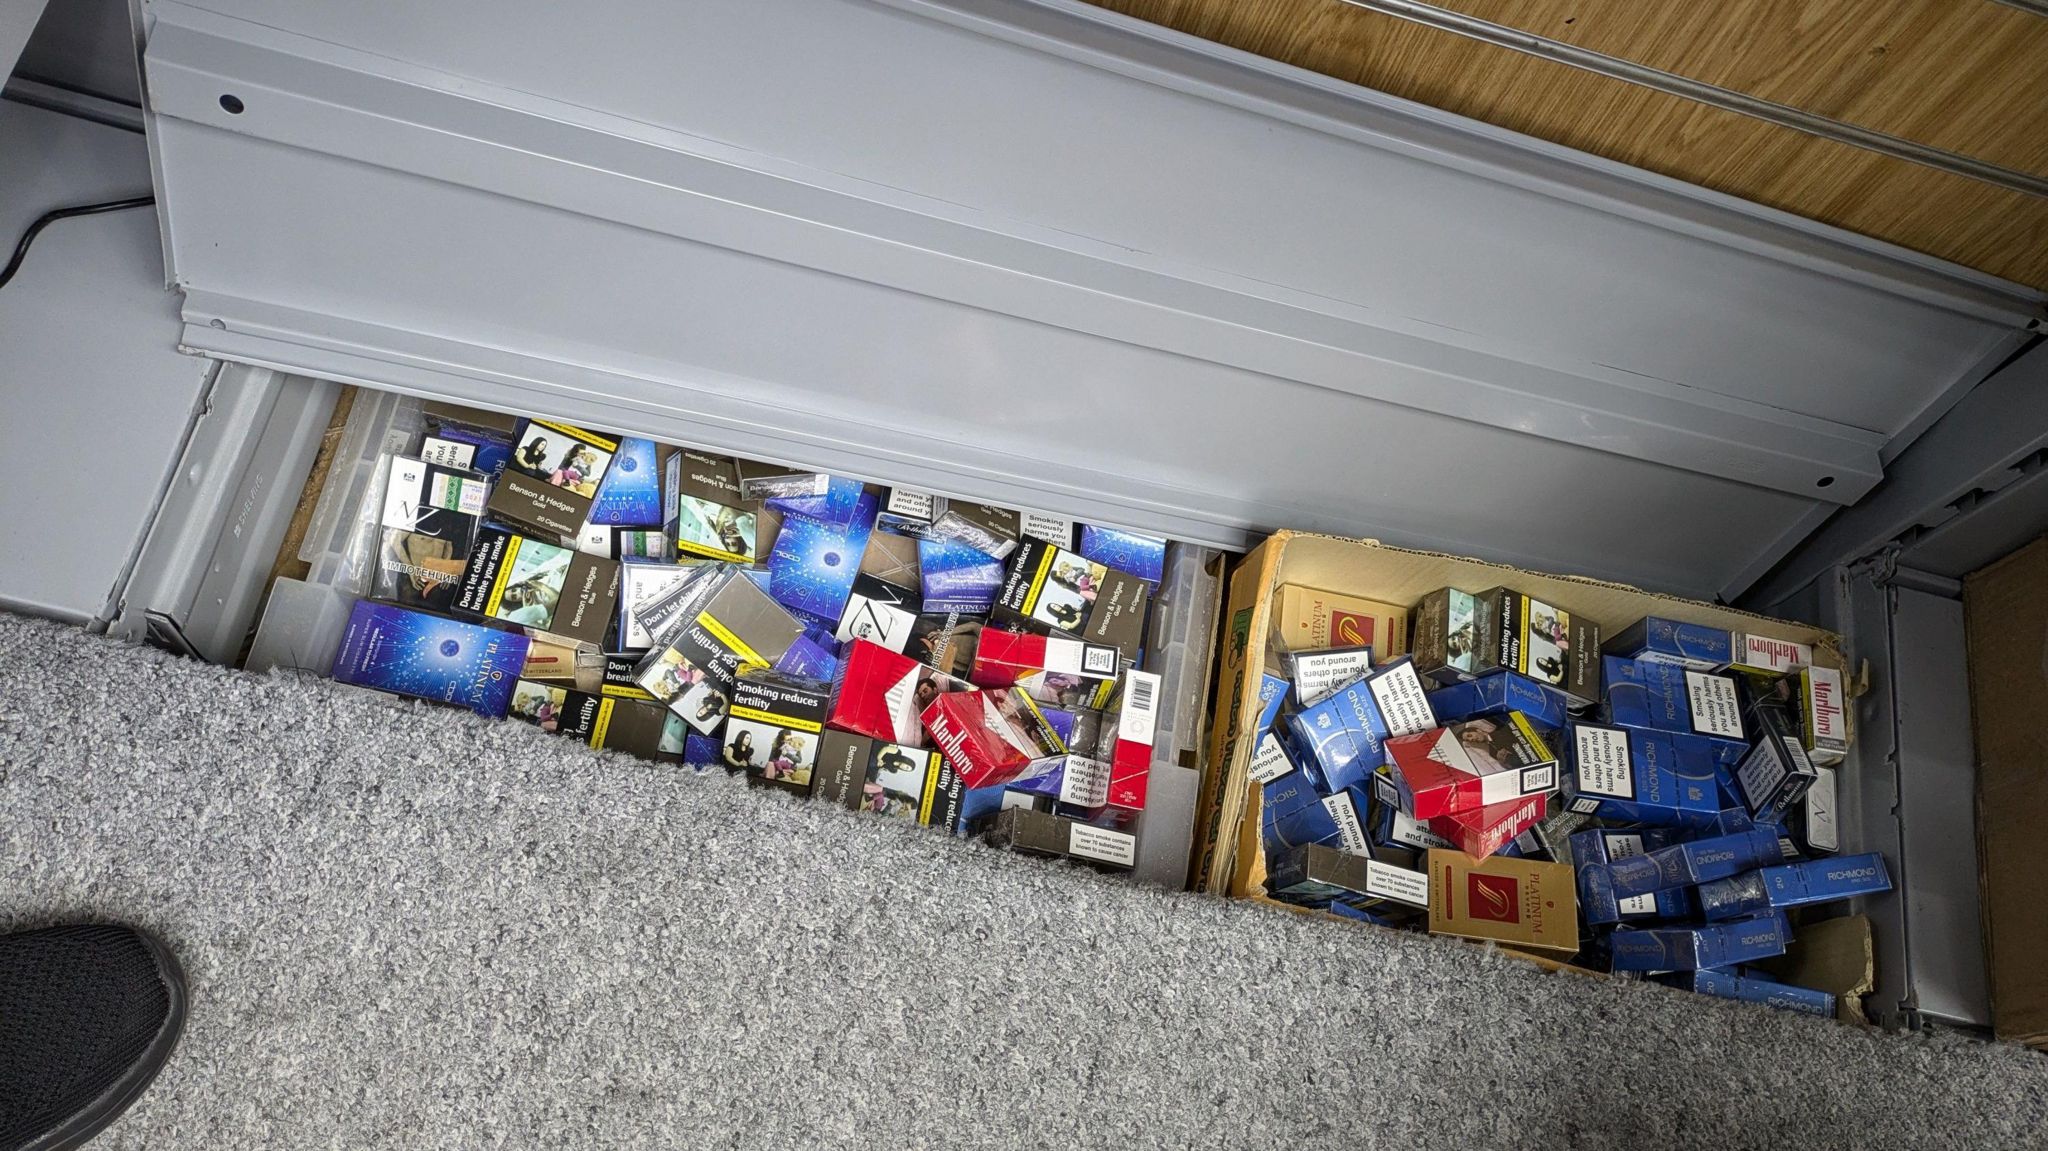 Two boxes stuffed with cigarettes in their packaging. The boxes are hidden under a grey floor panel which is lifted